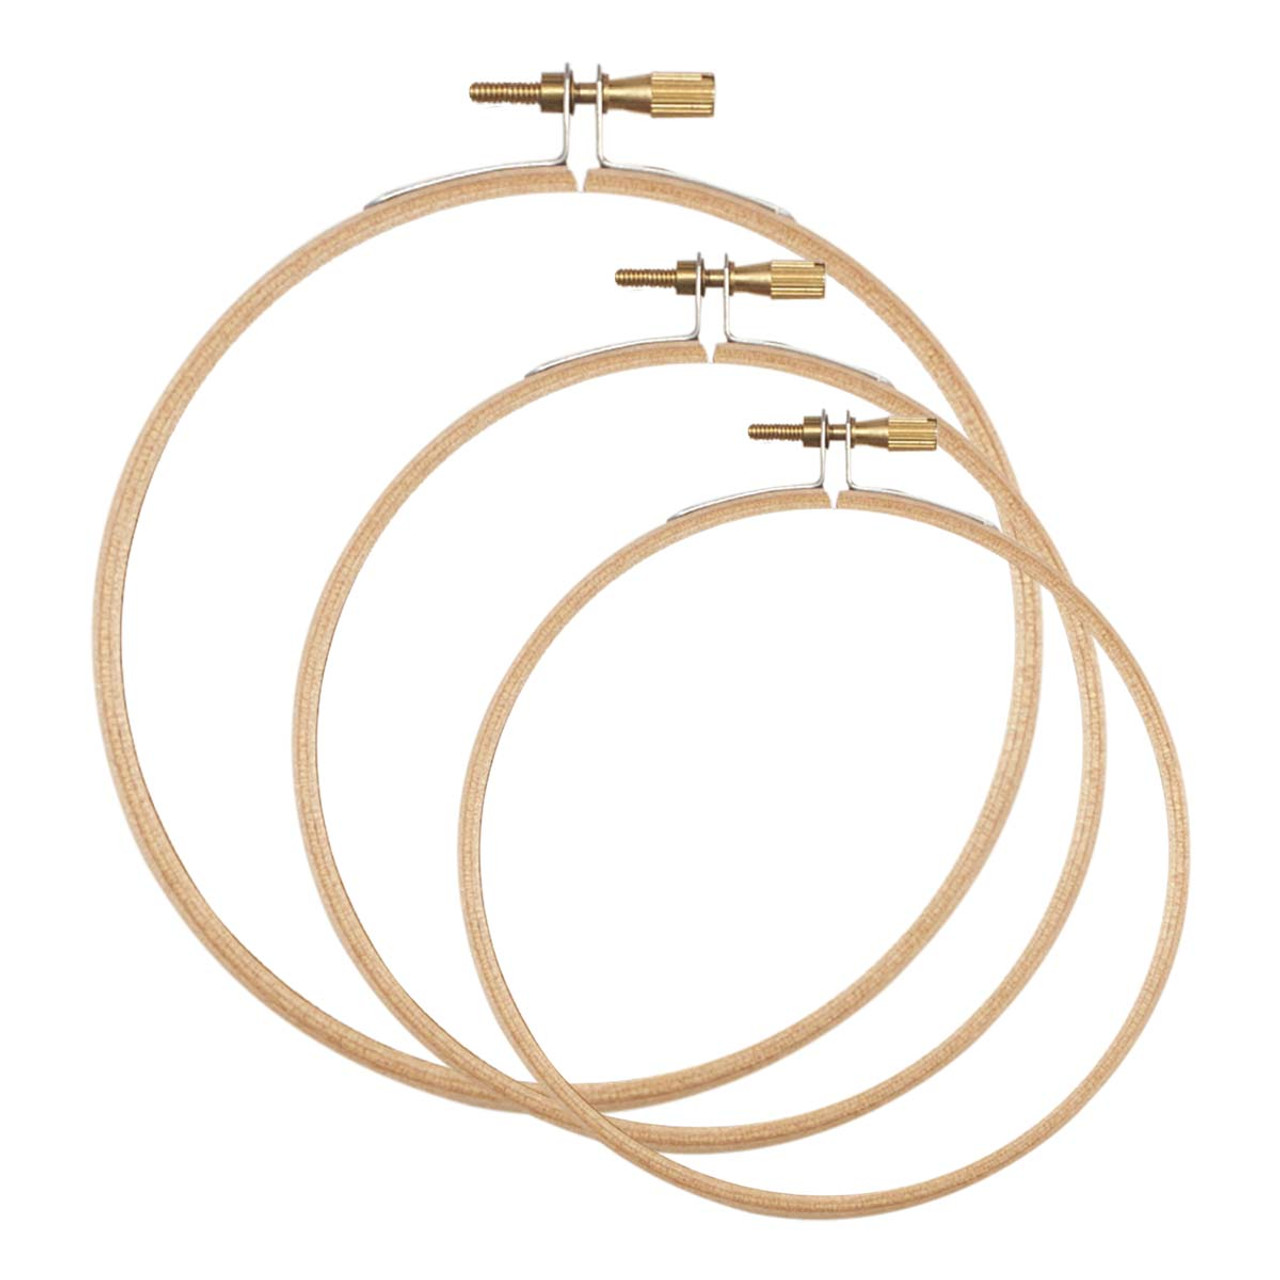 Herrschners Wooden Embroidery Hoops, Set of 3 Accessory